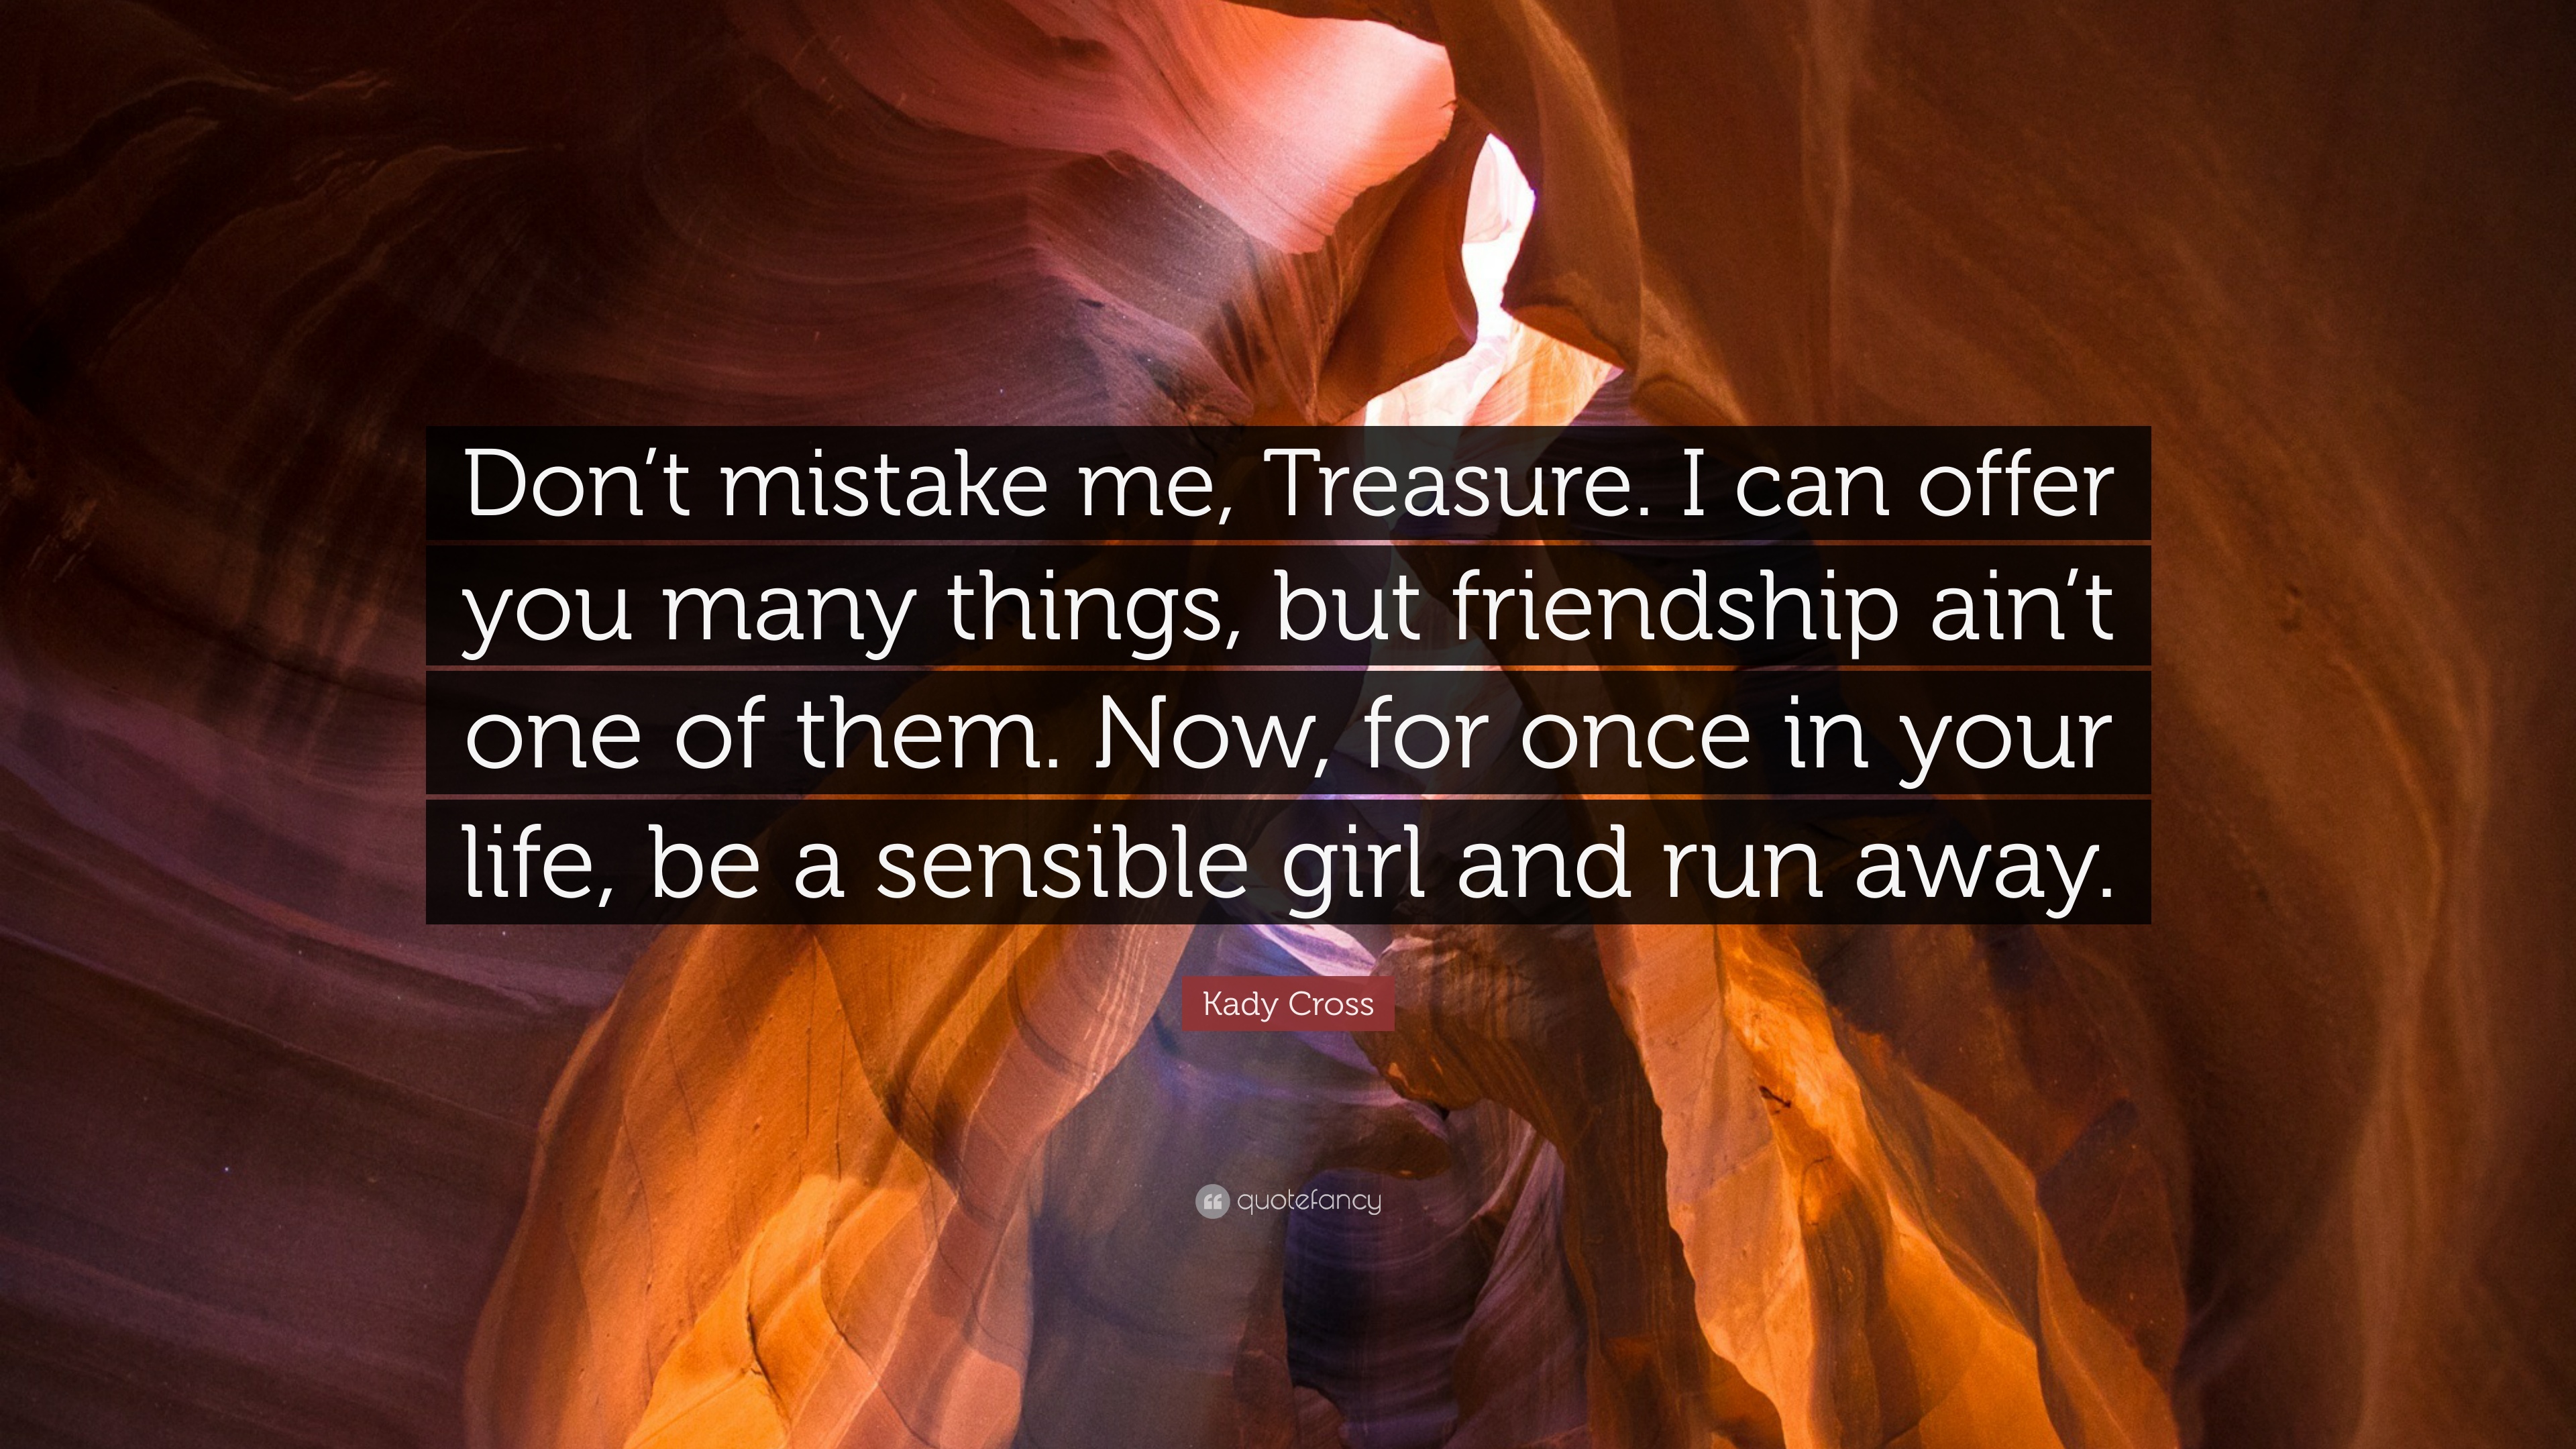 Kady Cross Quote: “Don't mistake me, Treasure. I can offer you many ...